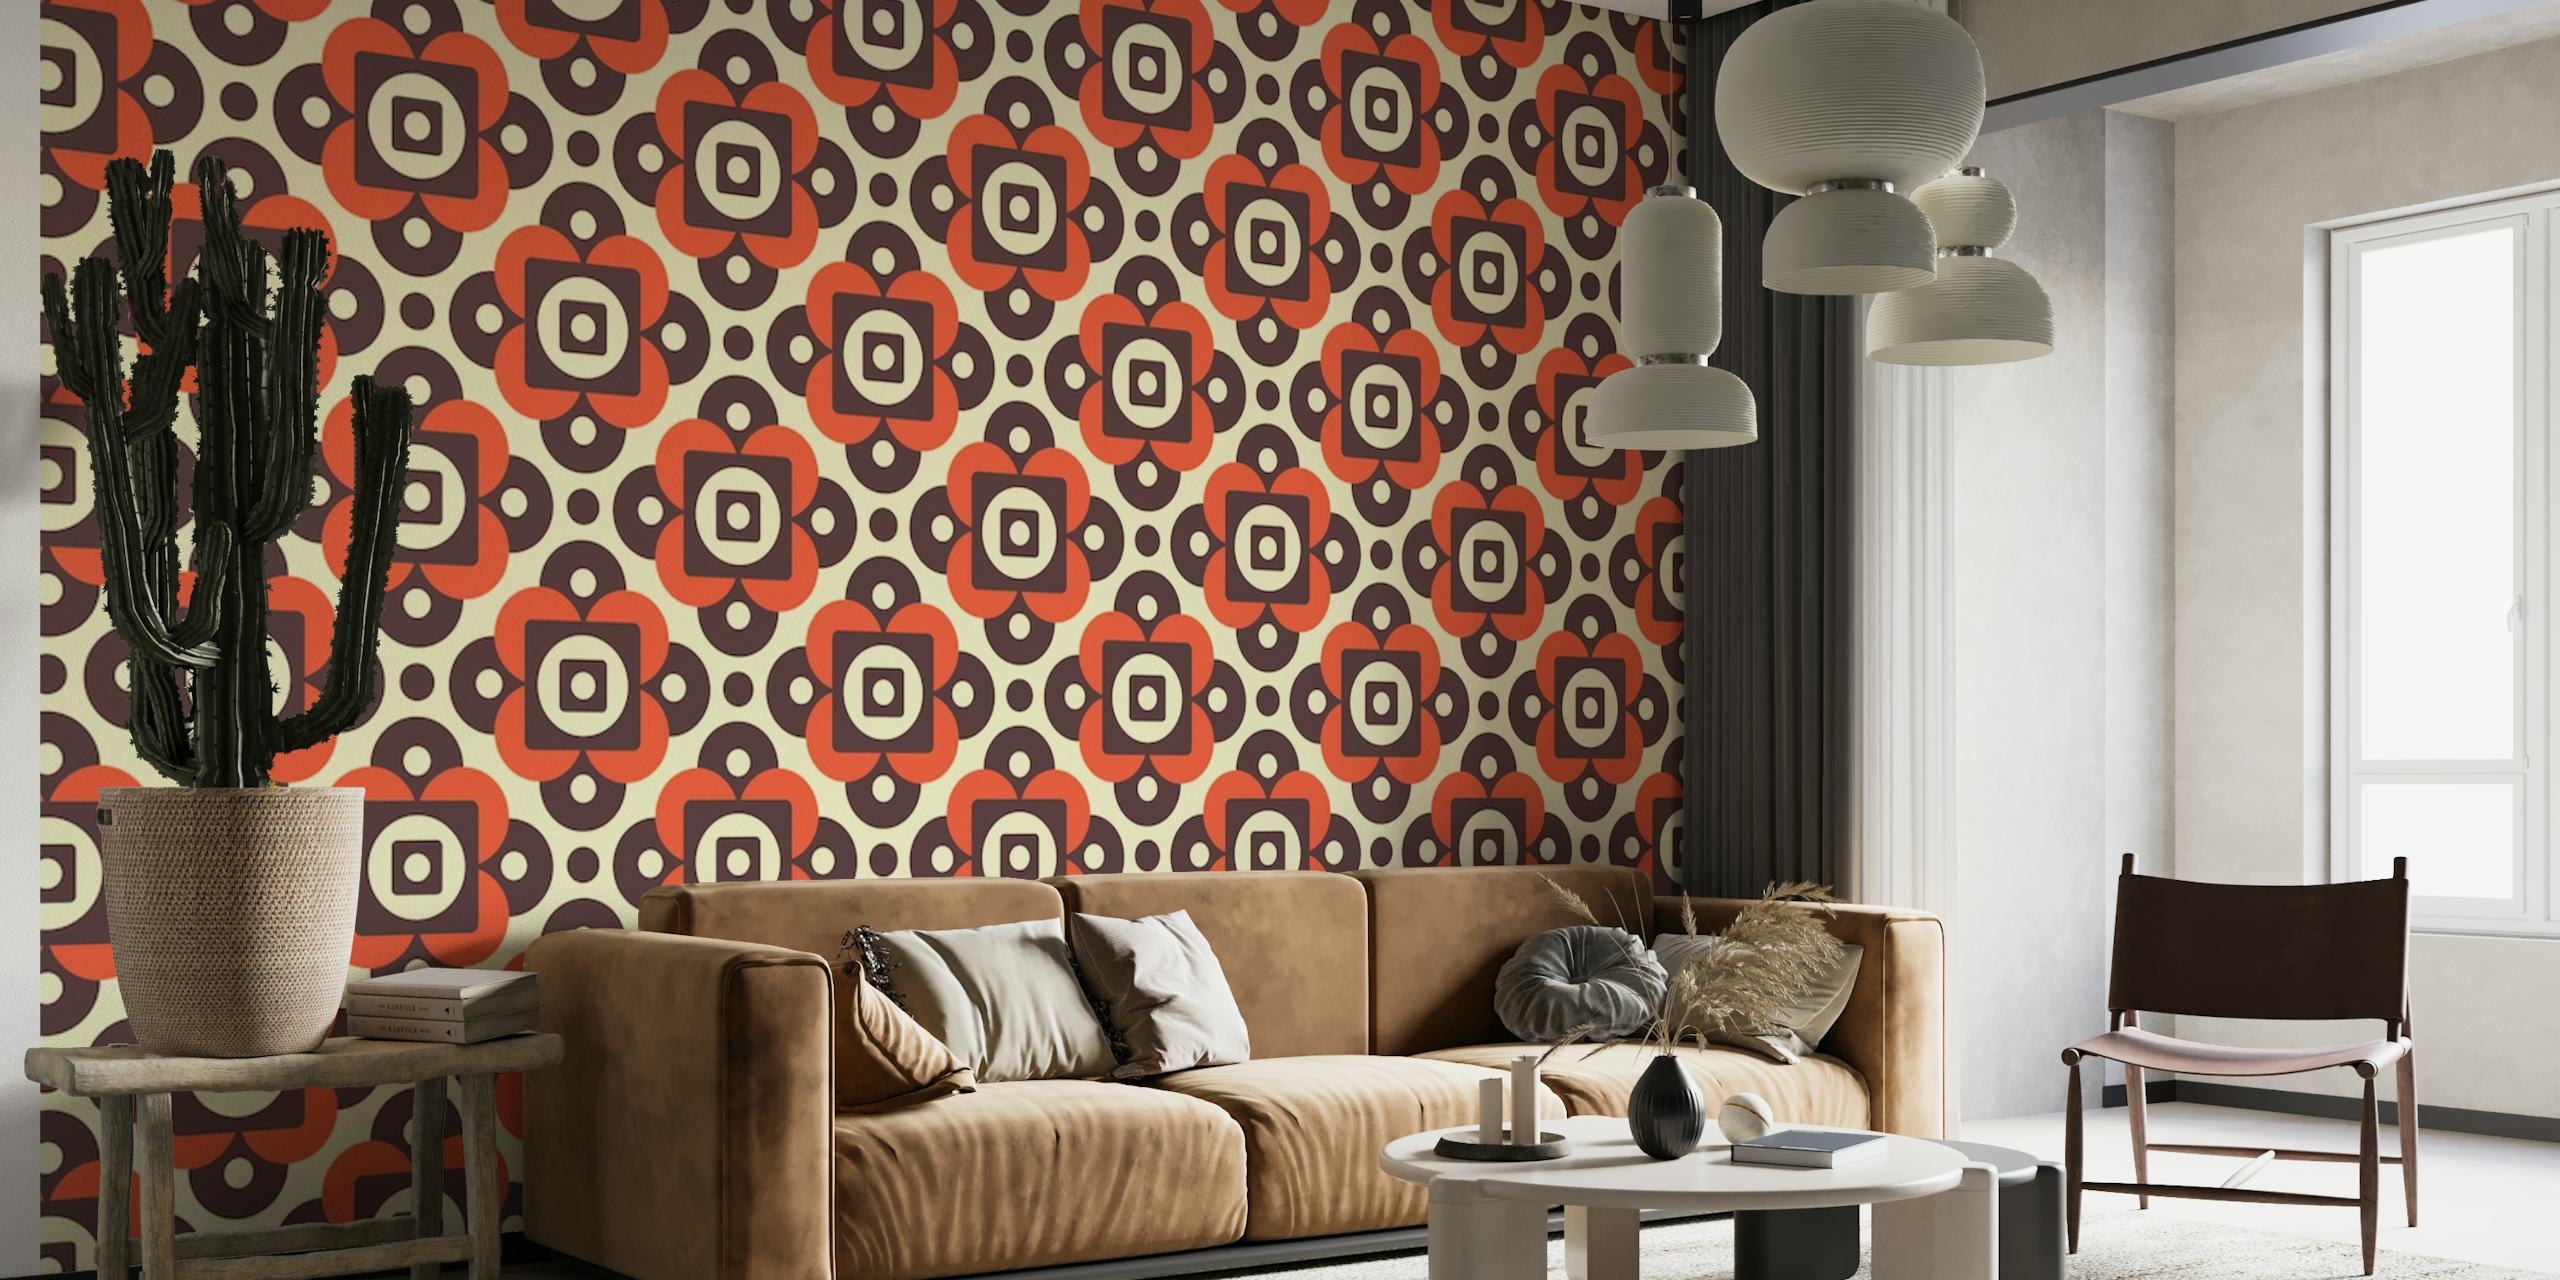 Vintage geometric pattern wall mural with warm color palette